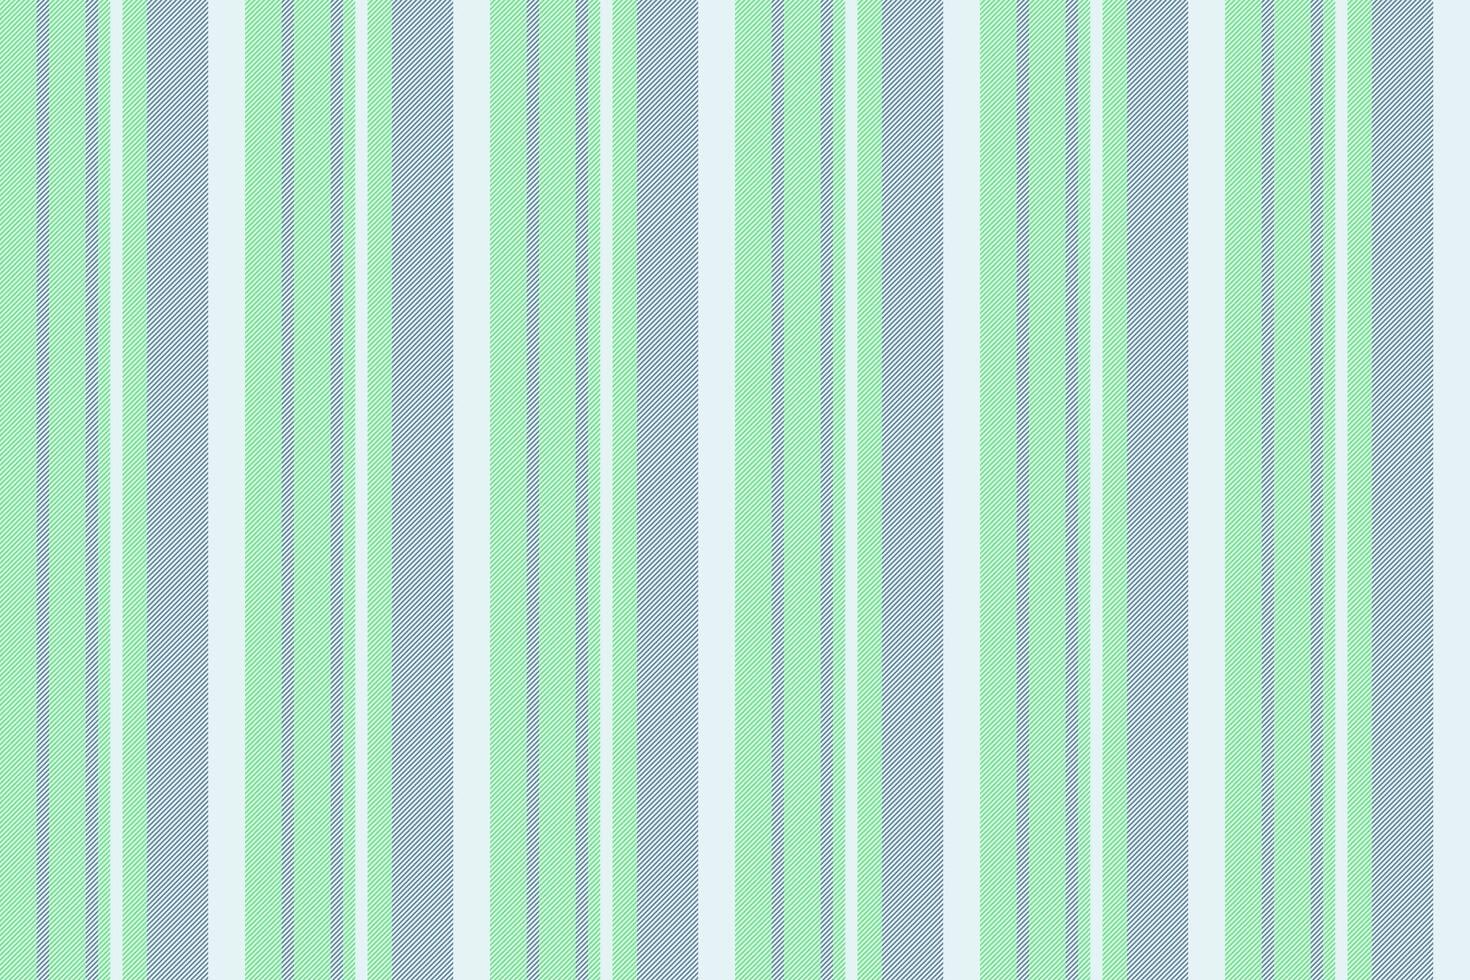 Fabric stripe pattern of lines vertical background with a textile vector texture seamless.